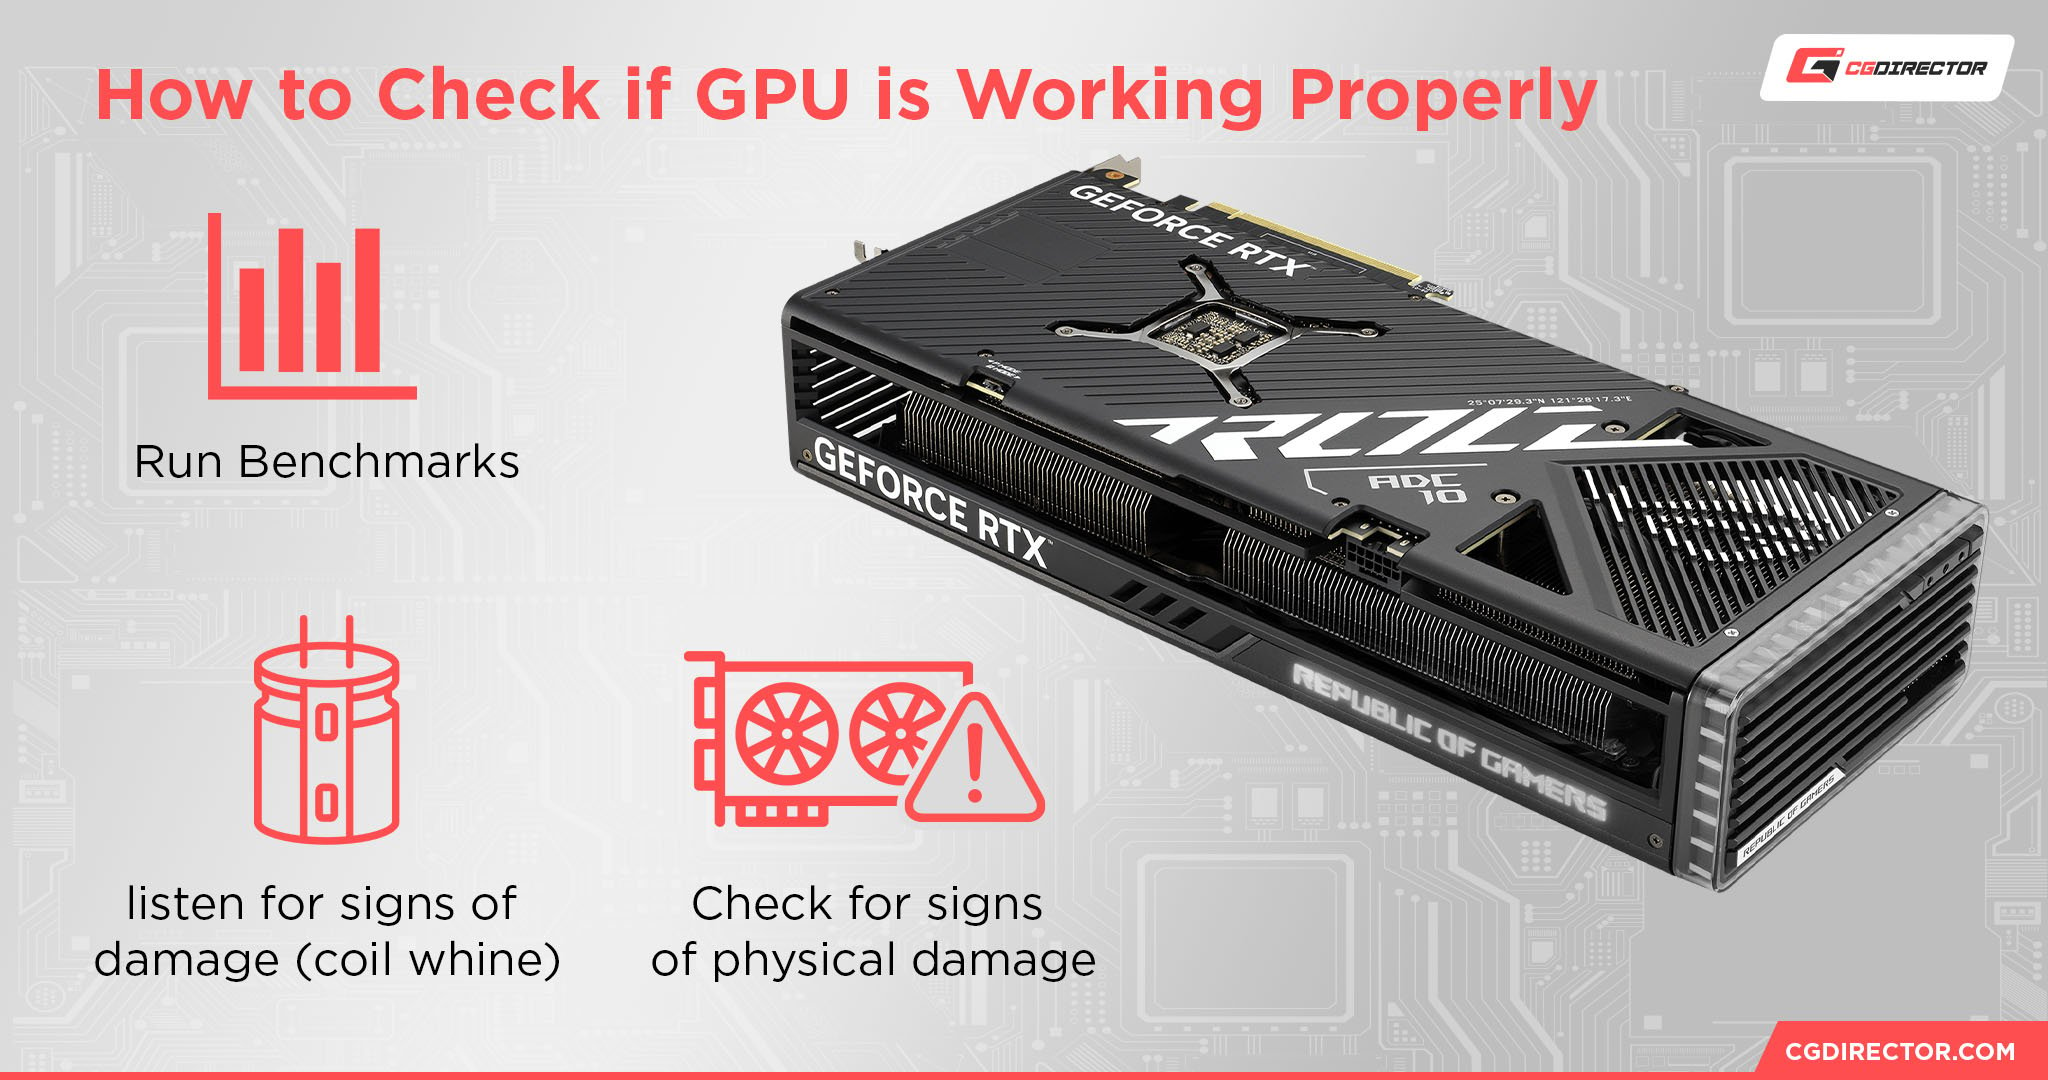 How to Check if GPU is Working Properly